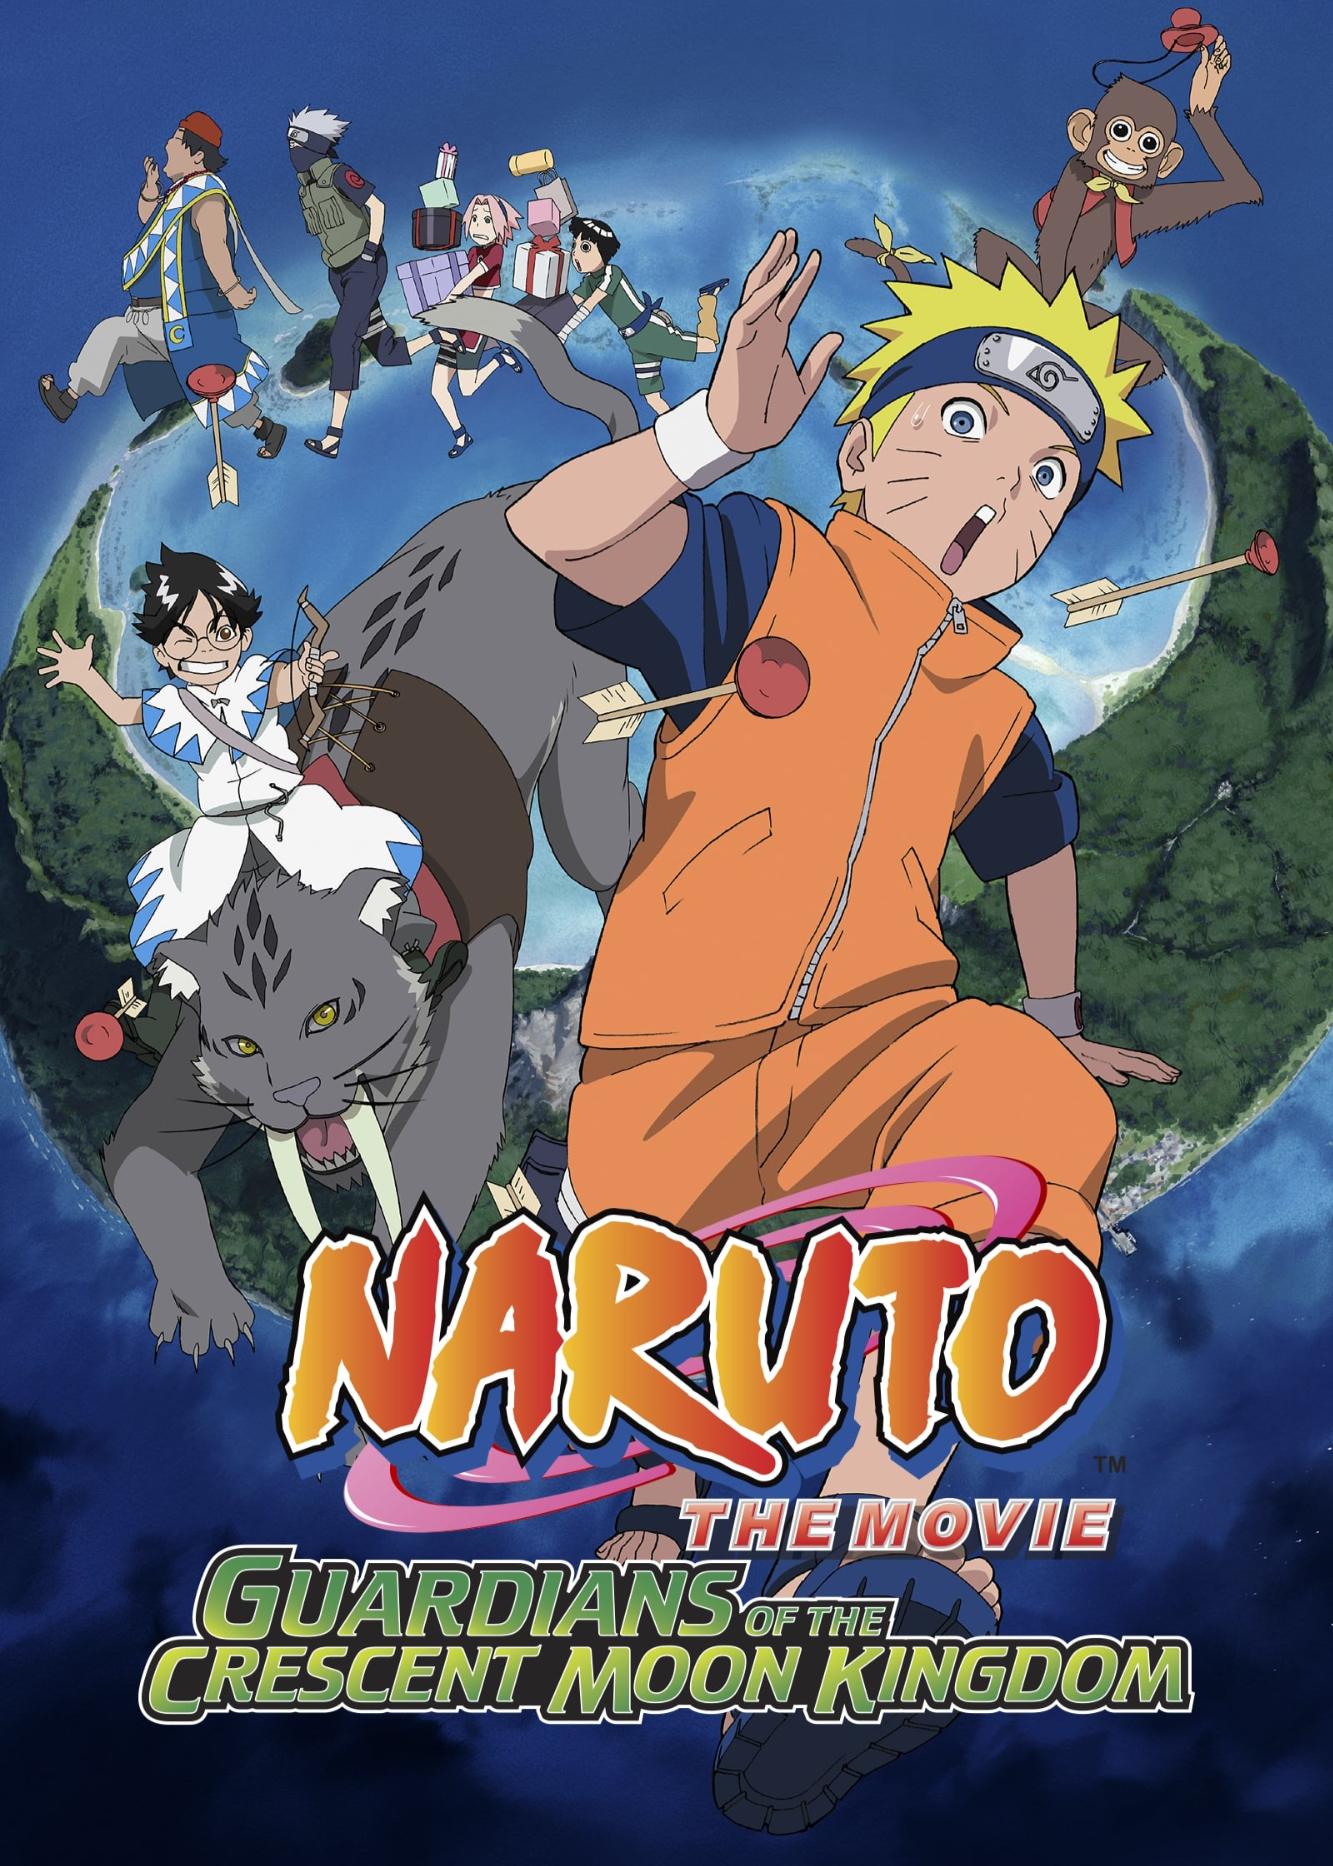 Naruto the Movie 3: Guardians of the Crescent Moon Kingdom - Naruto the Movie 3: Guardians of the Crescent Moon Kingdom